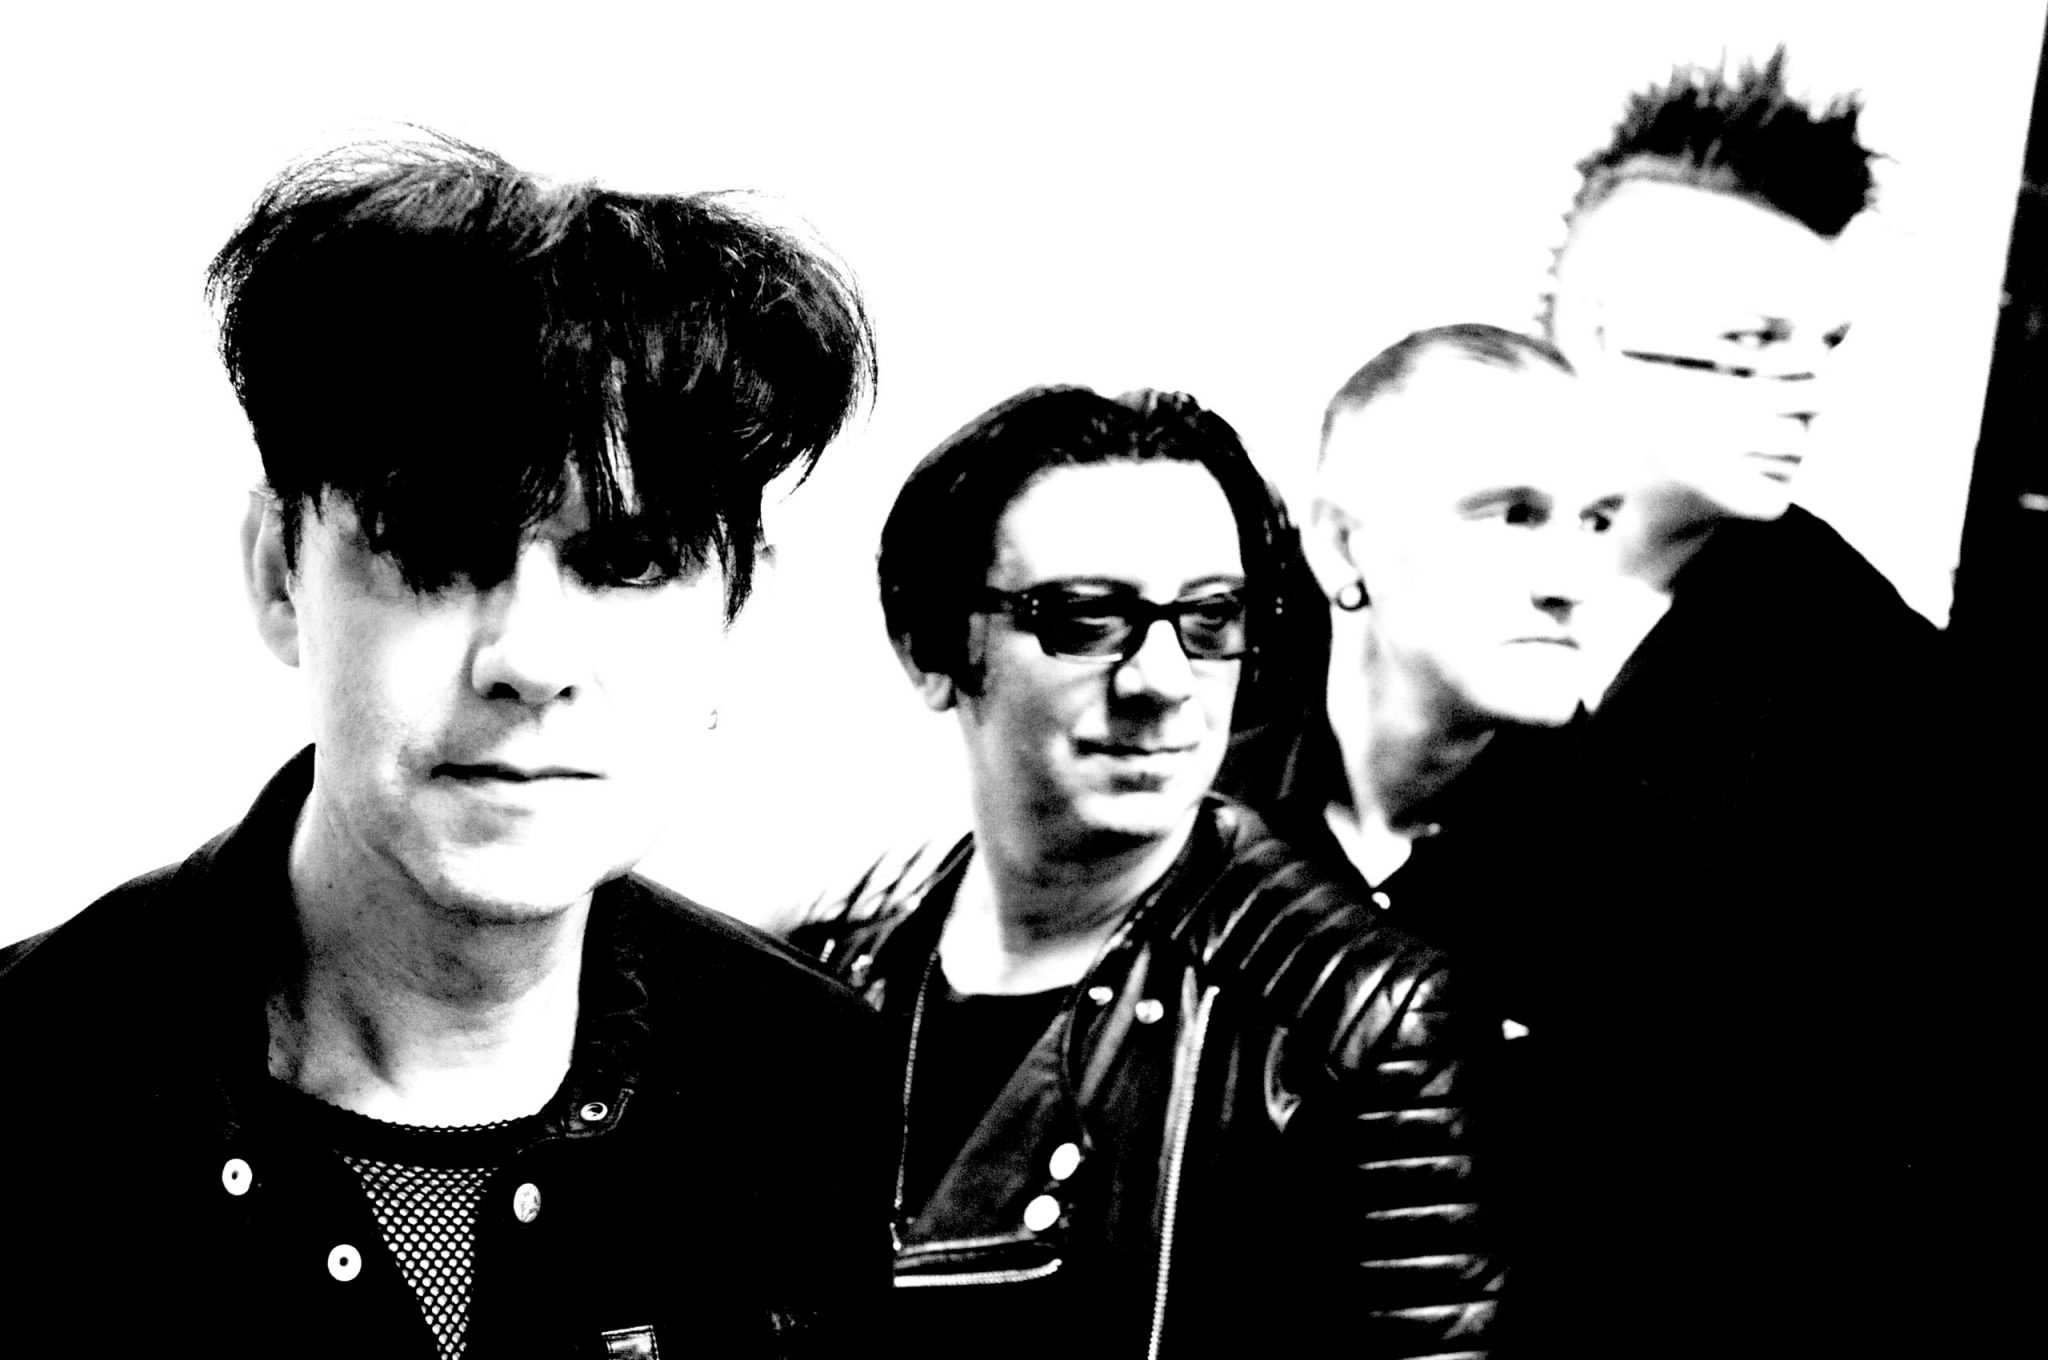 Clan of Xymox Release New Album "Limbo" and Announce North American